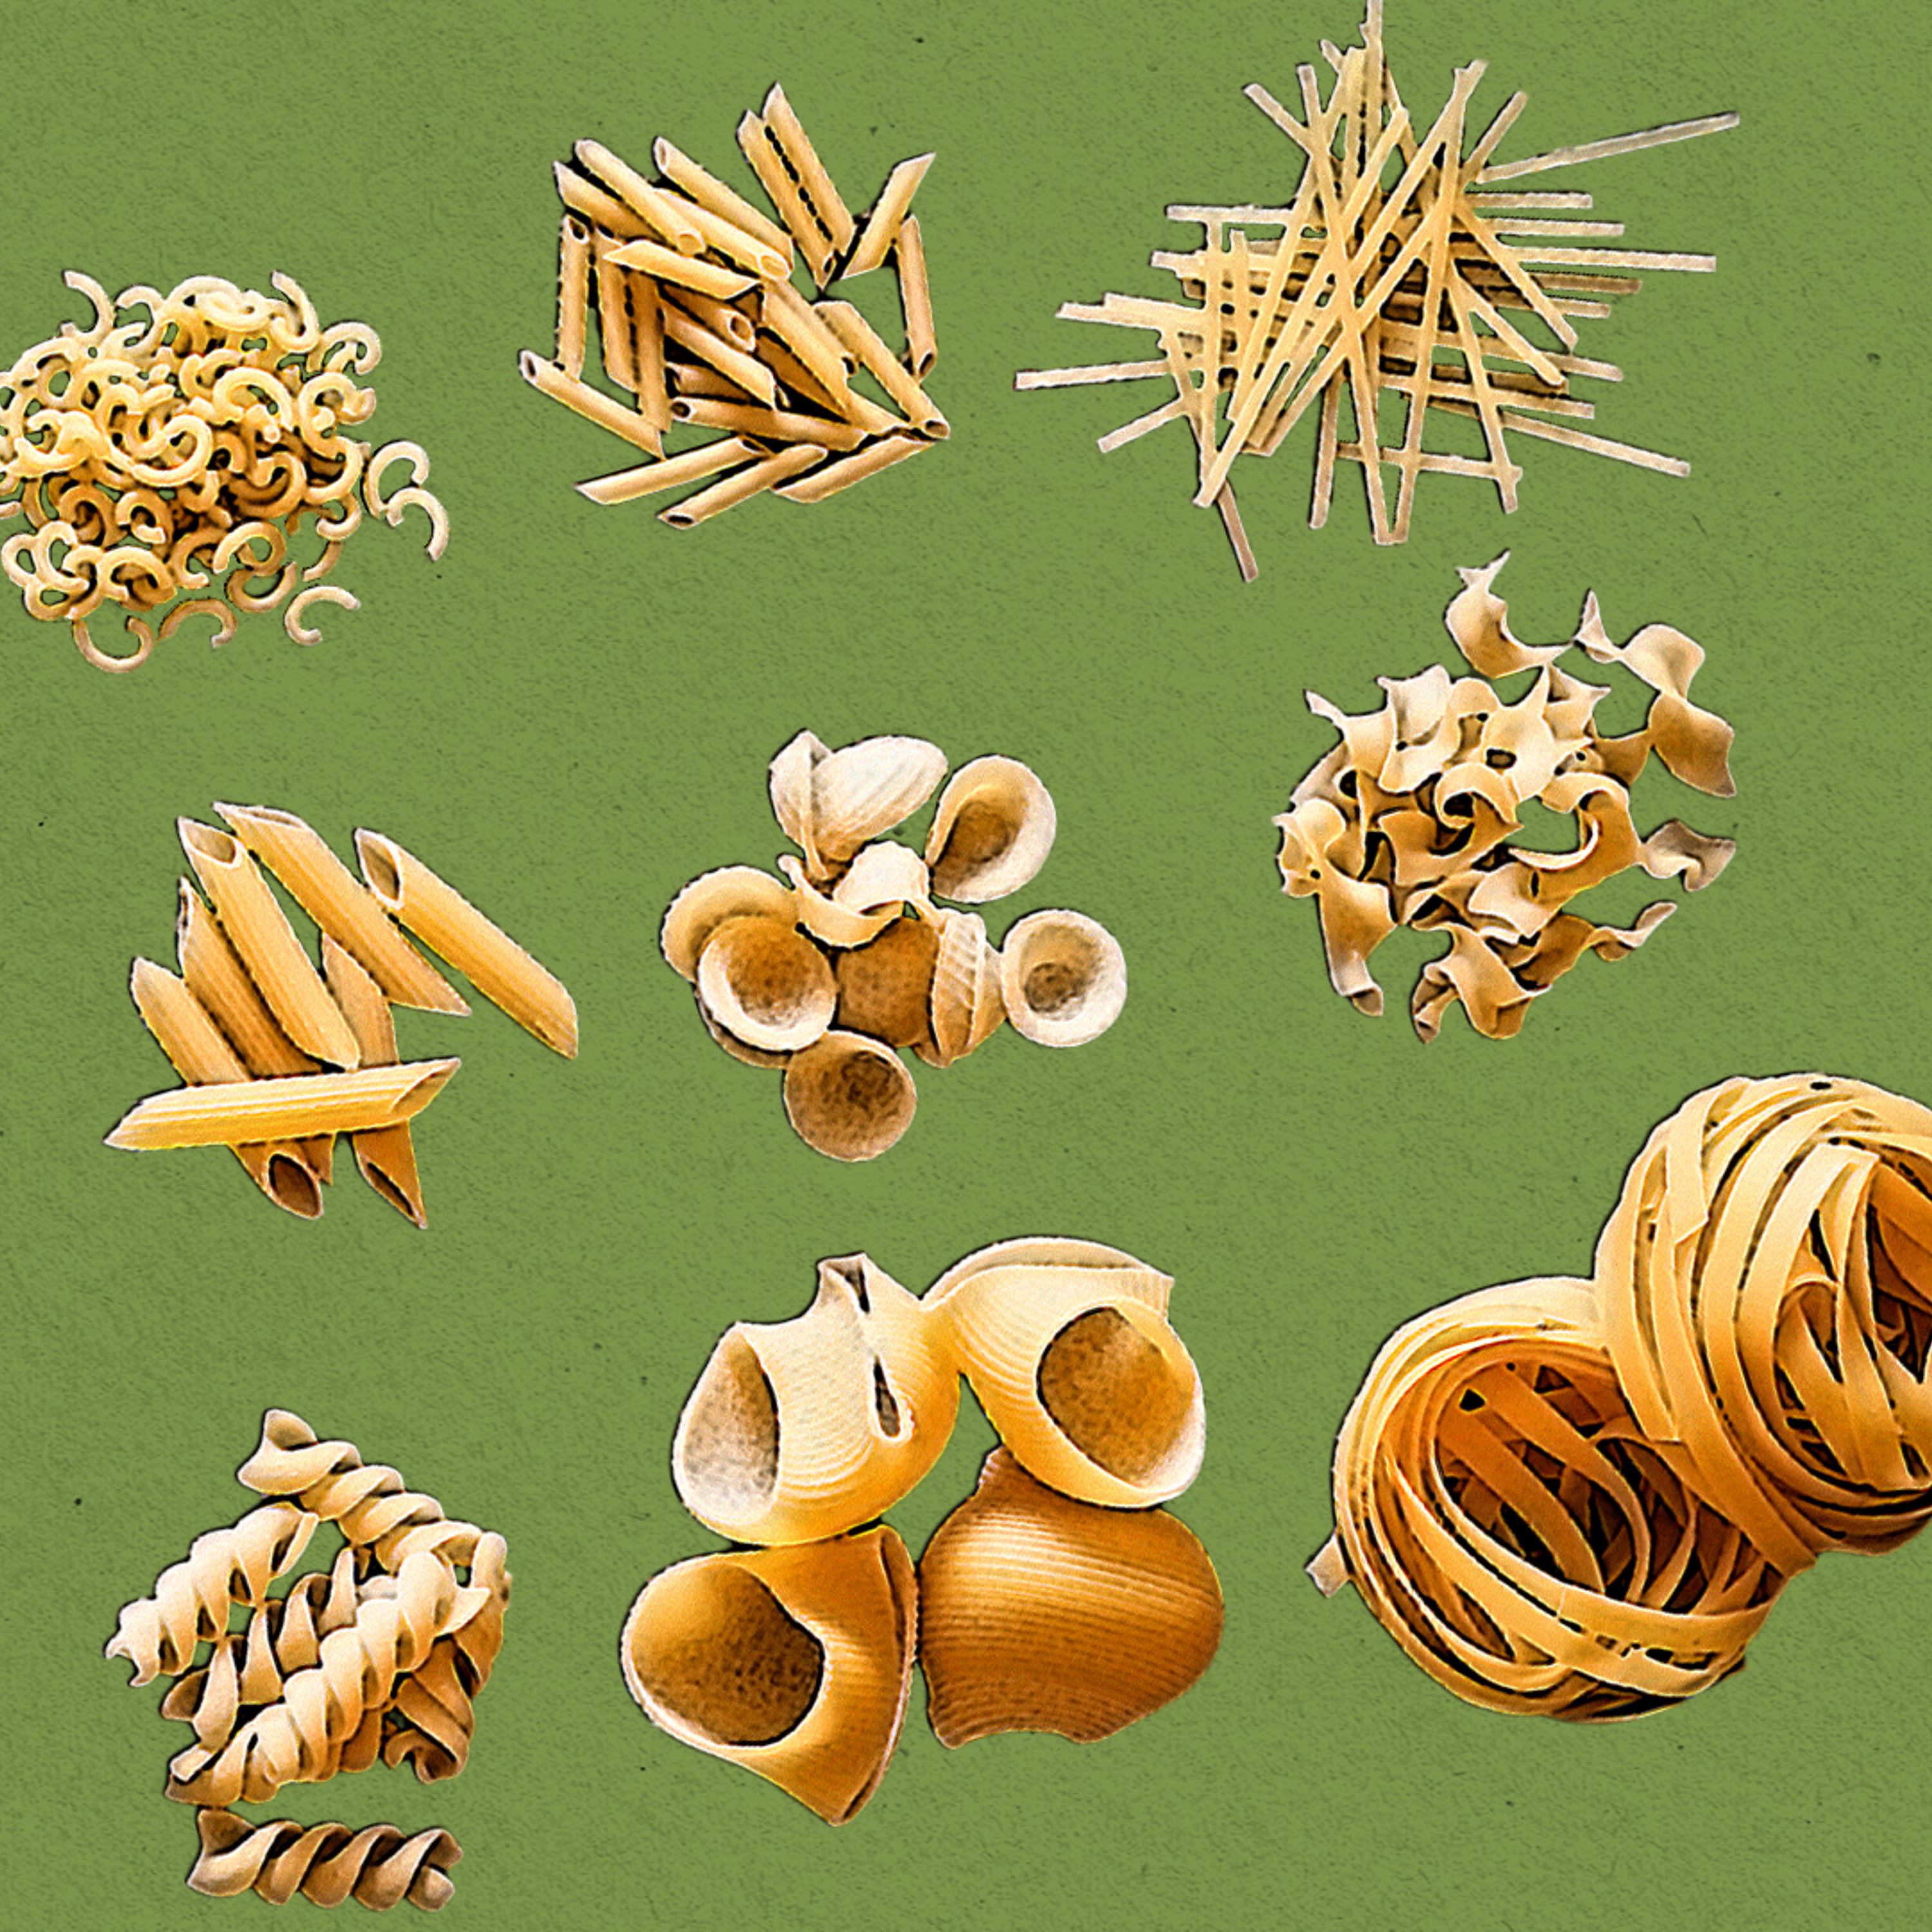 What's the best pasta shape?